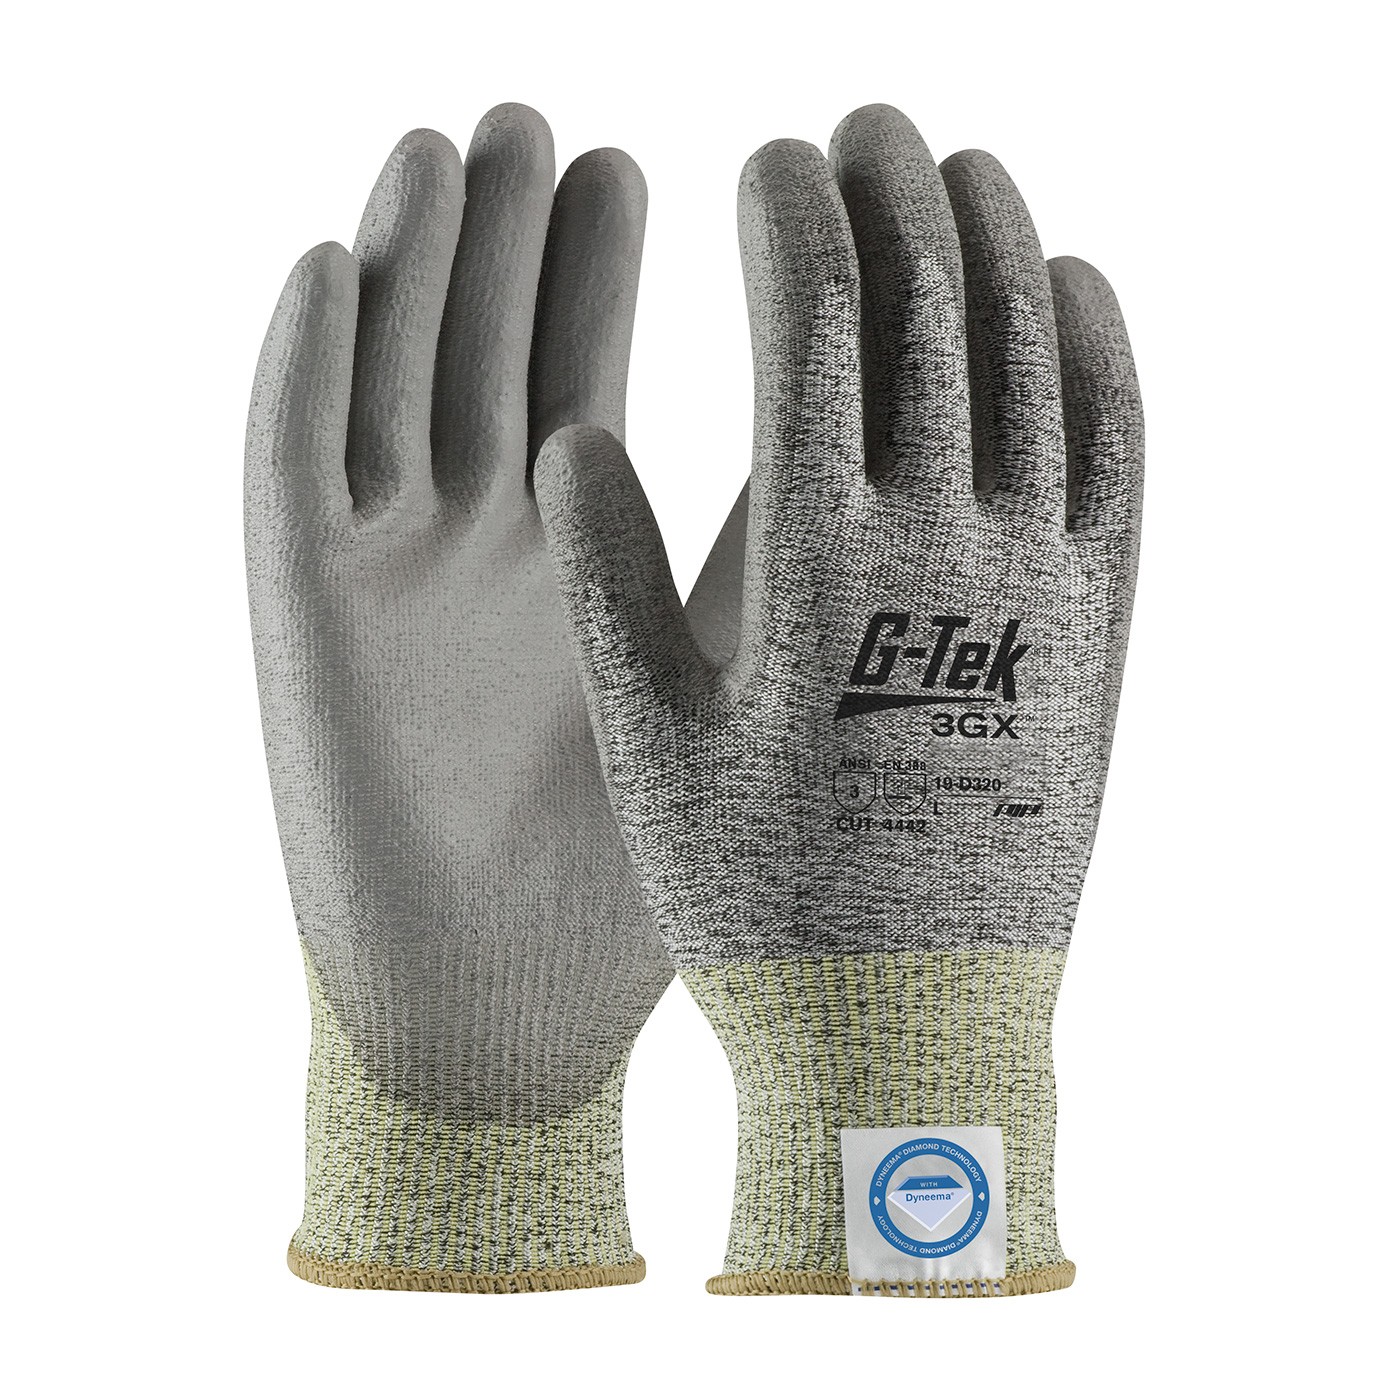 G-Tek® 3GX® Seamless Knit Dyneema® Diamond Blended Glove with Polyurethane Coated Smooth Grip on Palm & Fingers  (#19-D320)